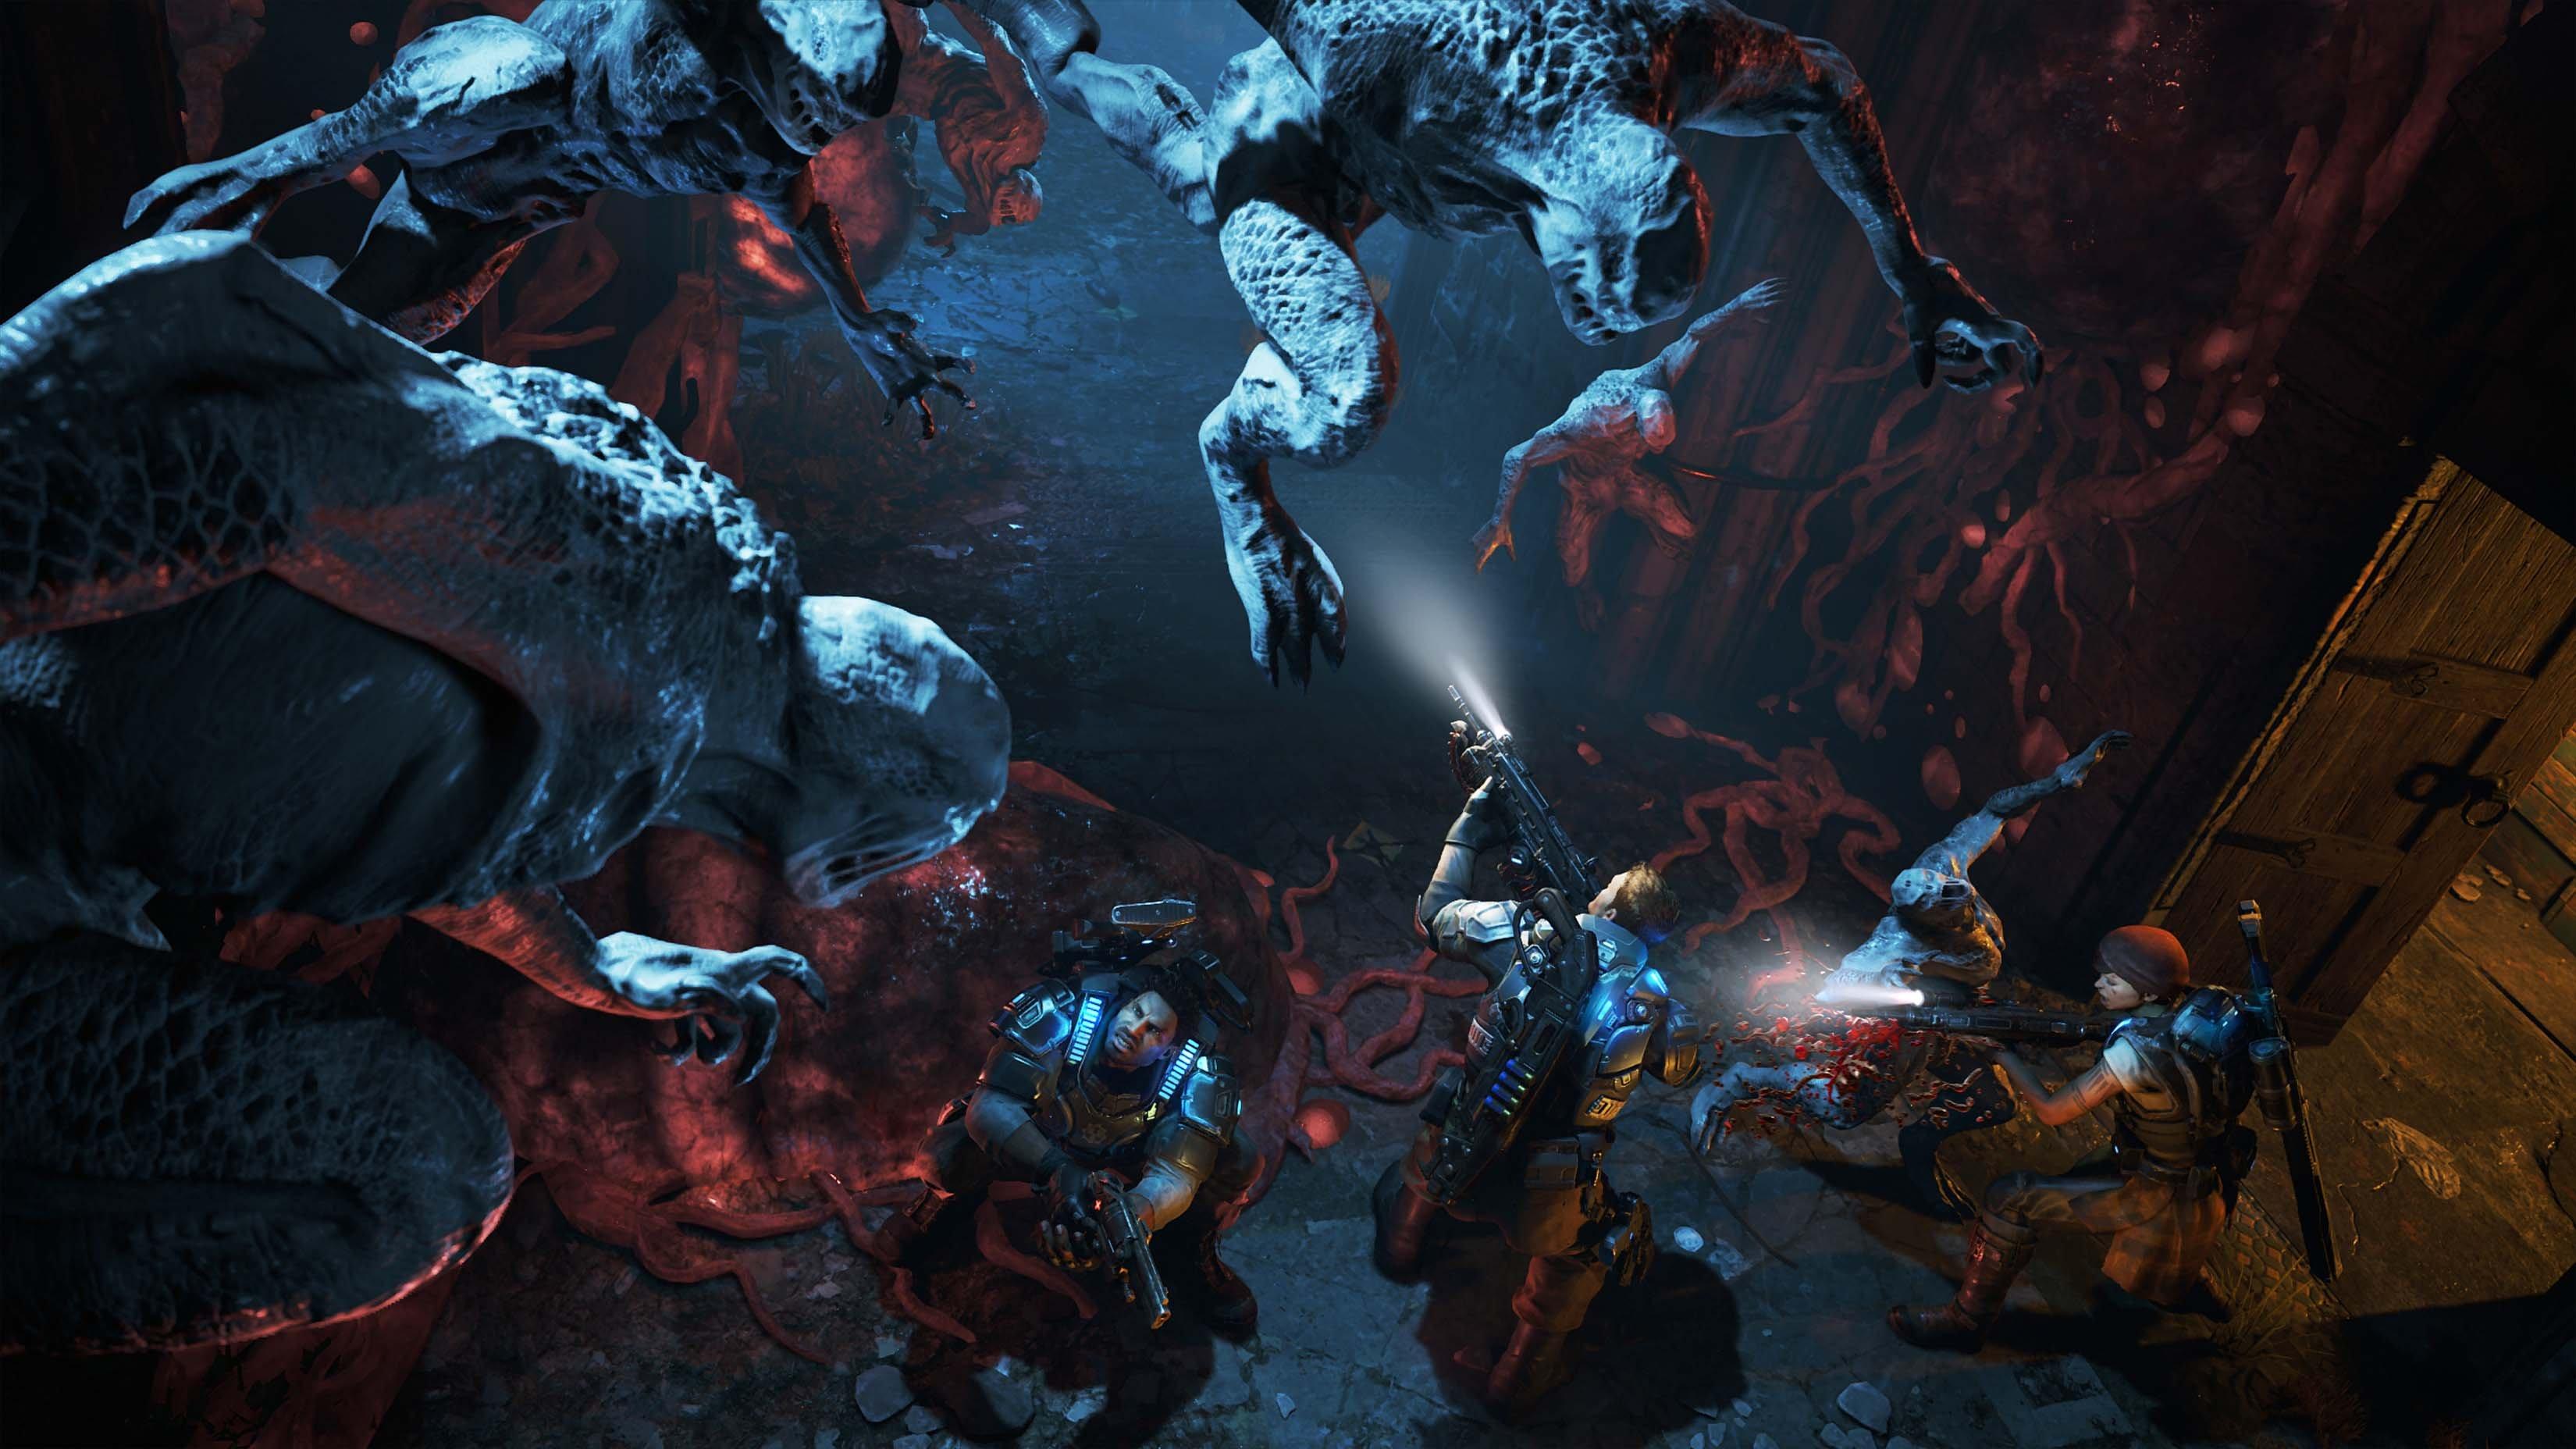 Gears of War 4 for Xbox One Review